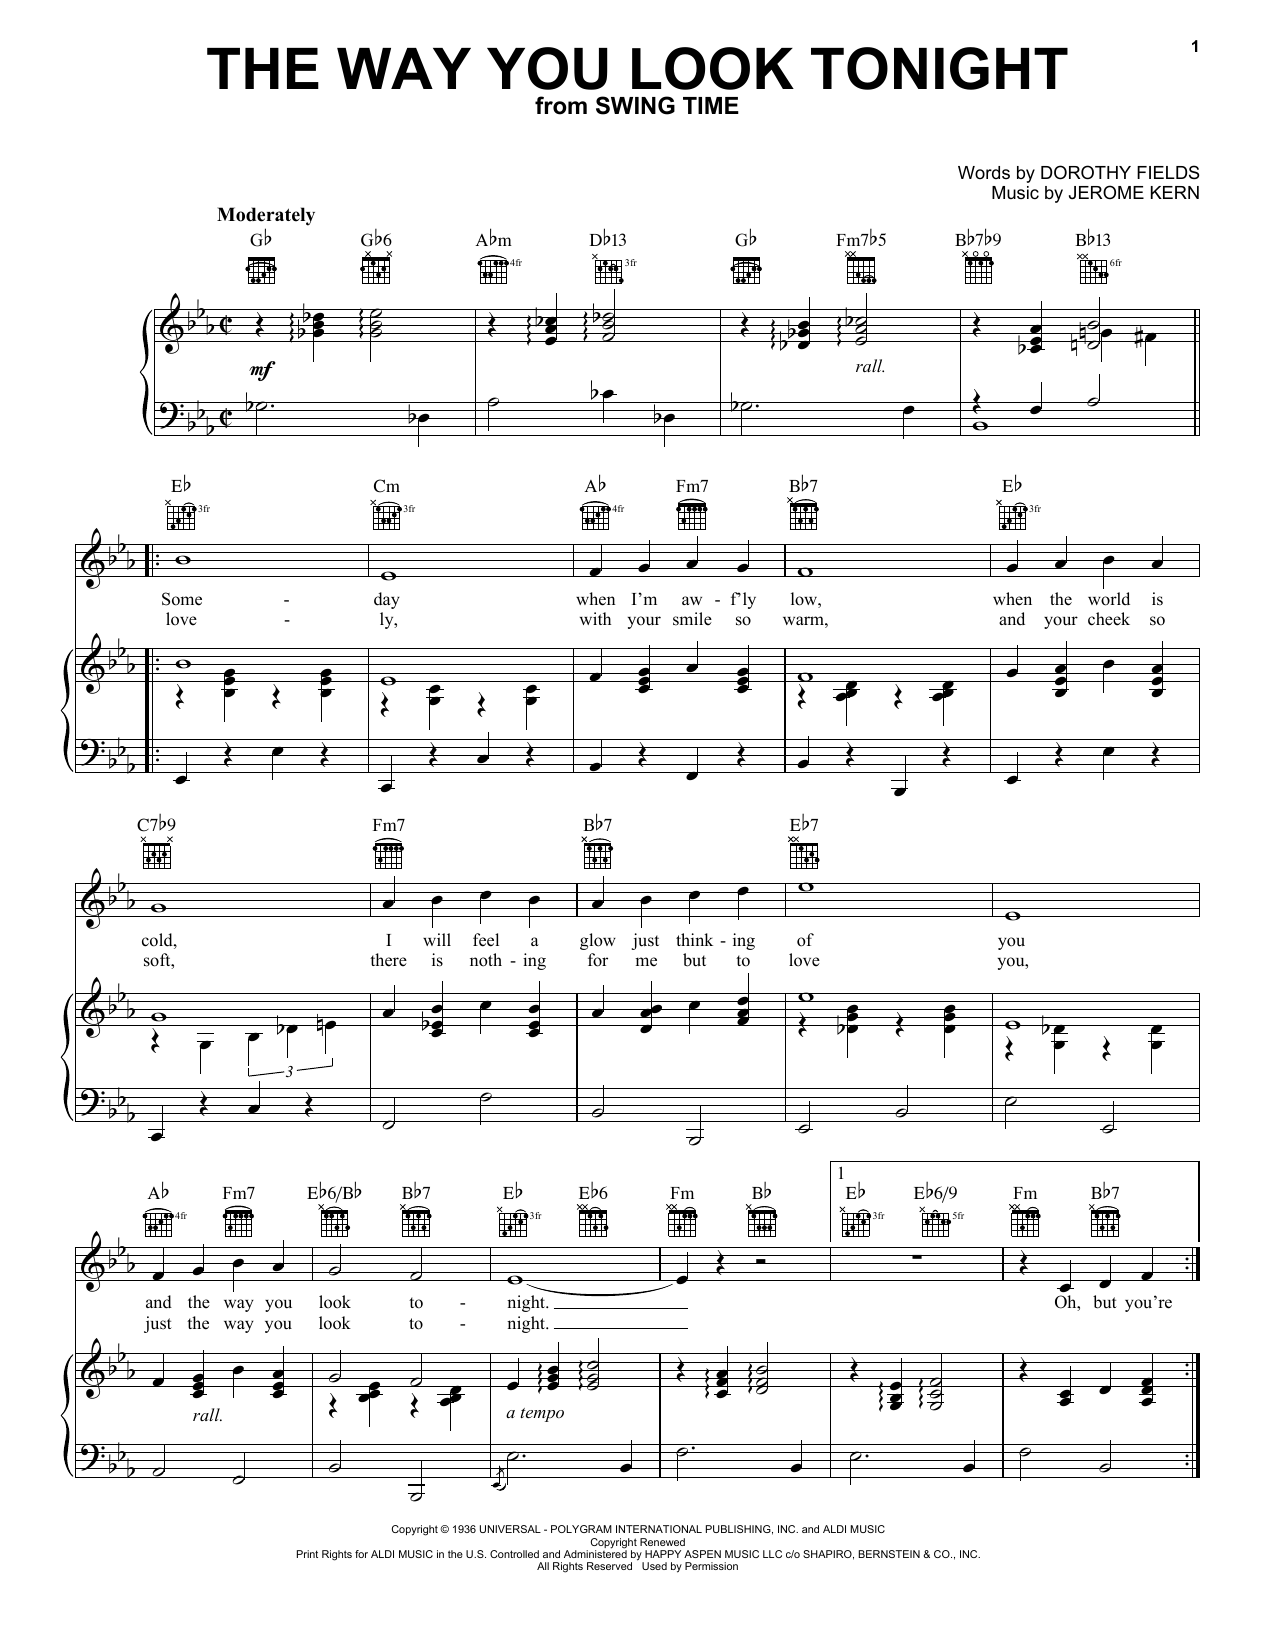 Frank Sinatra The Way You Look Tonight sheet music notes and chords. Download Printable PDF.